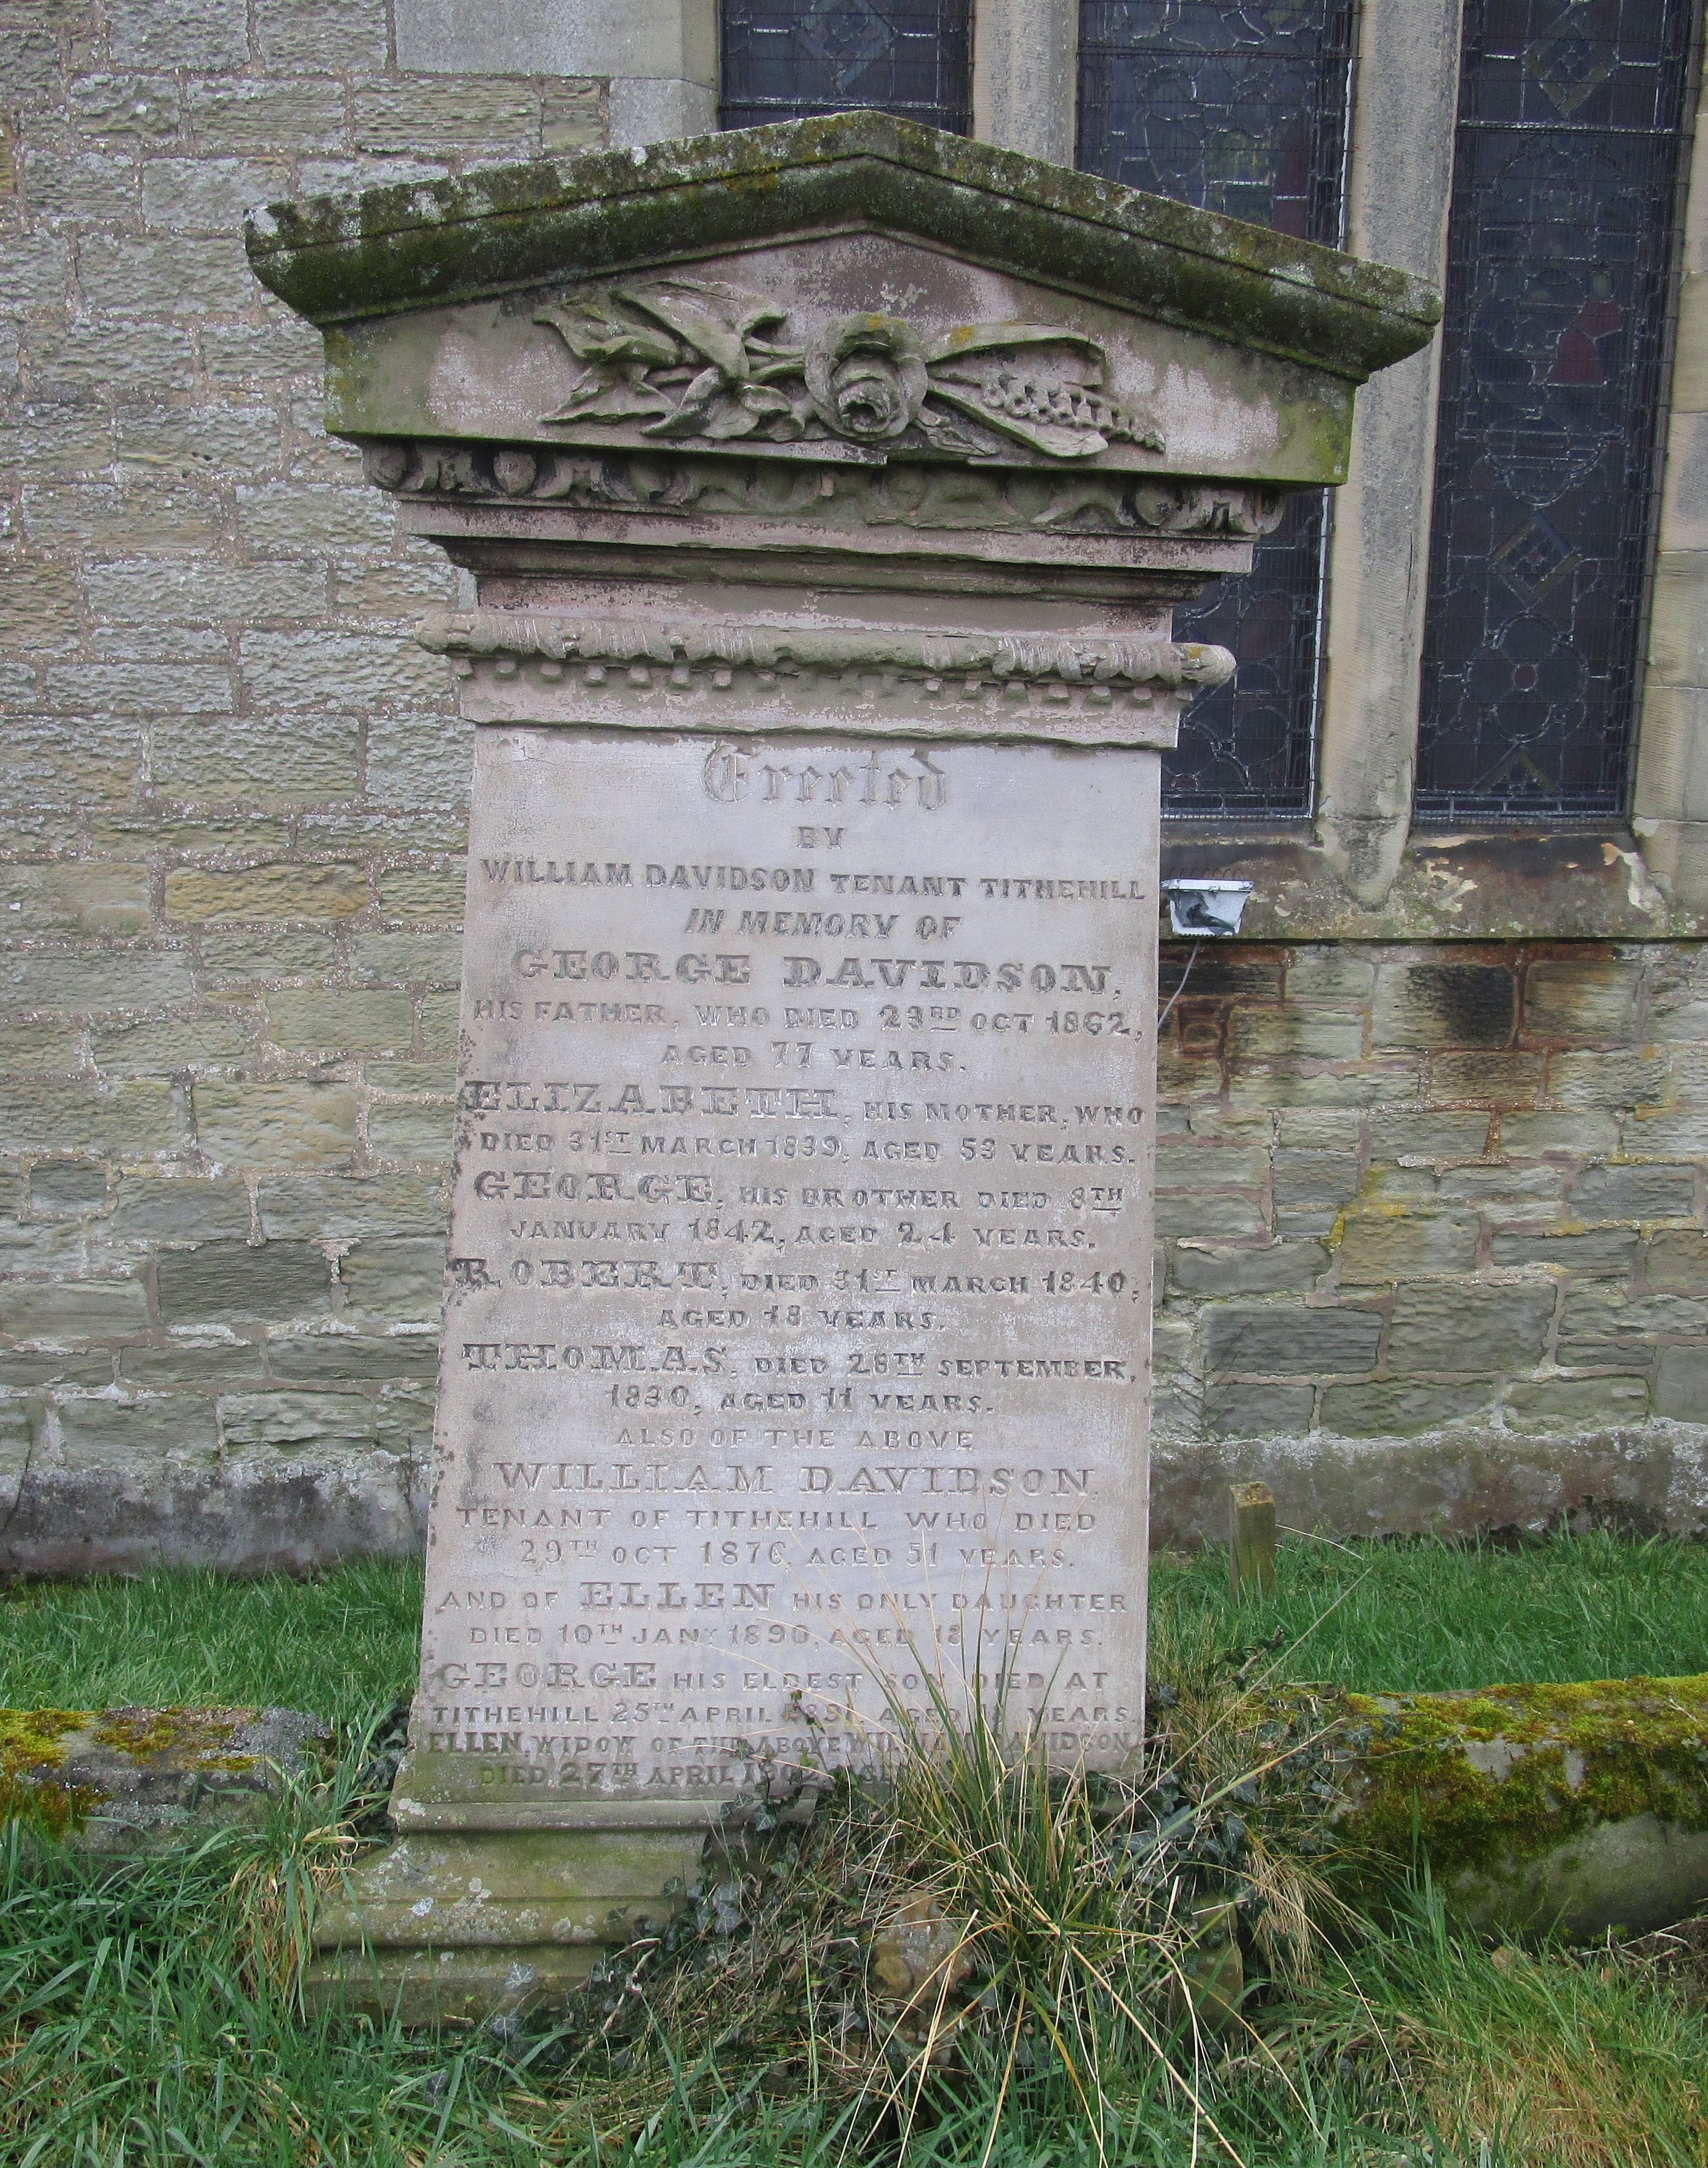 William Davidson and Family Gravestone - St Helen's Cornhill-on-Tweed, Linked To: <a href='profiles/i19984.html' >Elizabeth Davidson (mar. name)</a> and <a href='profiles/i7182.html' >George Davidson</a>